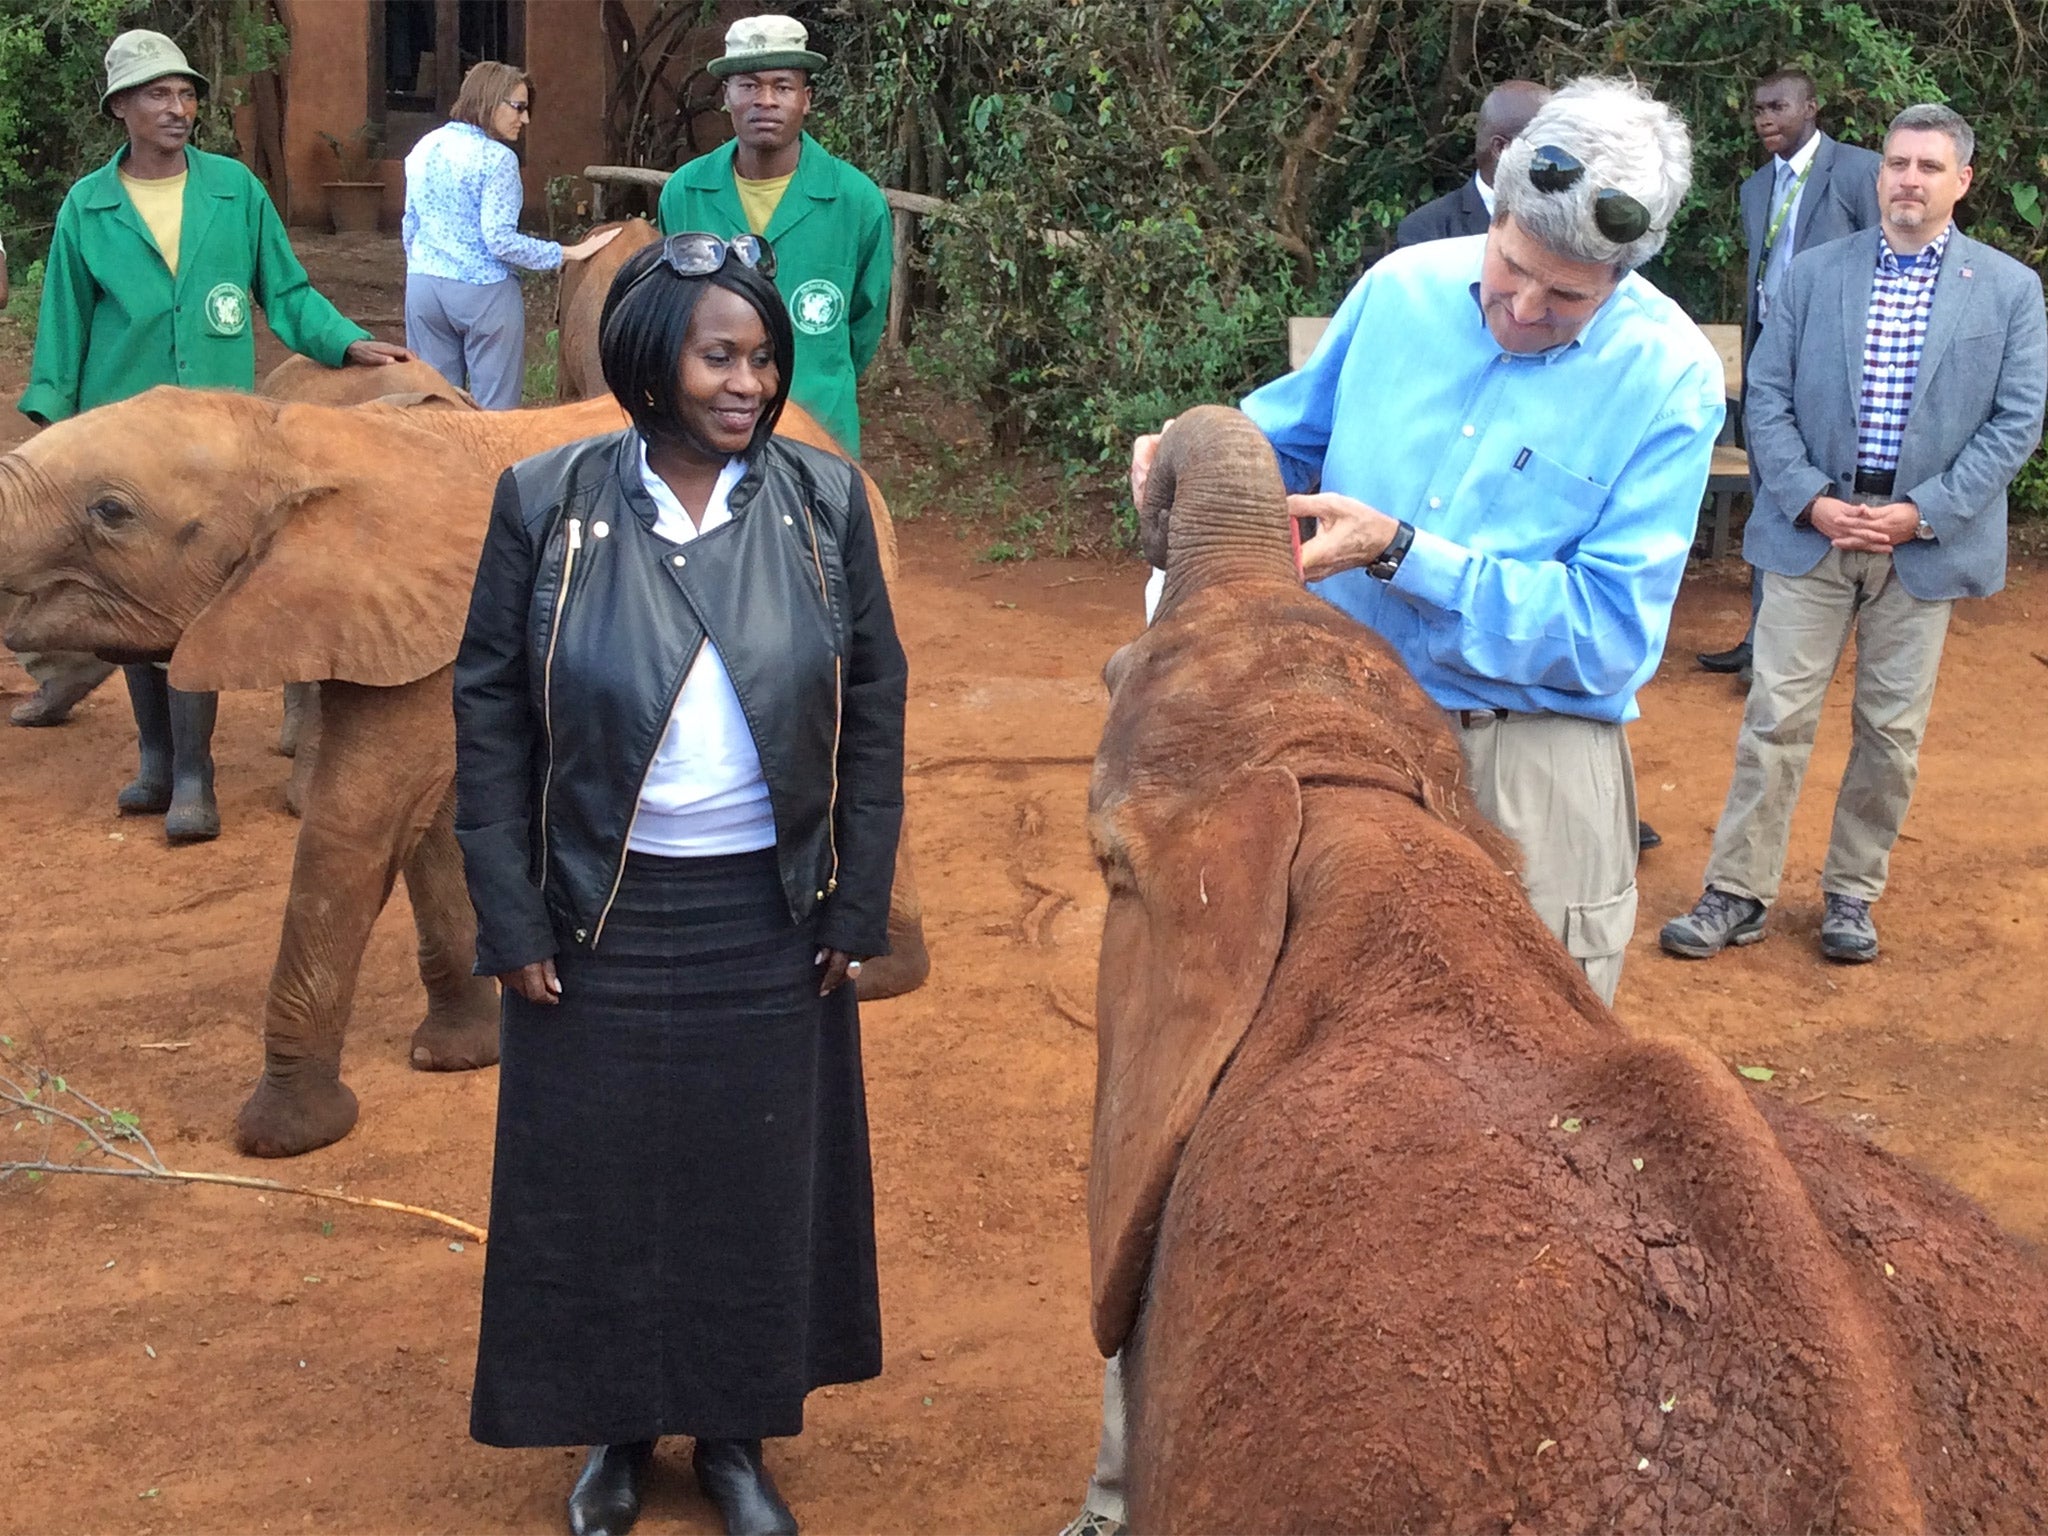 Professor Judi Wakhungu and John Kerry, the US Secretary of State, meet conservation workers